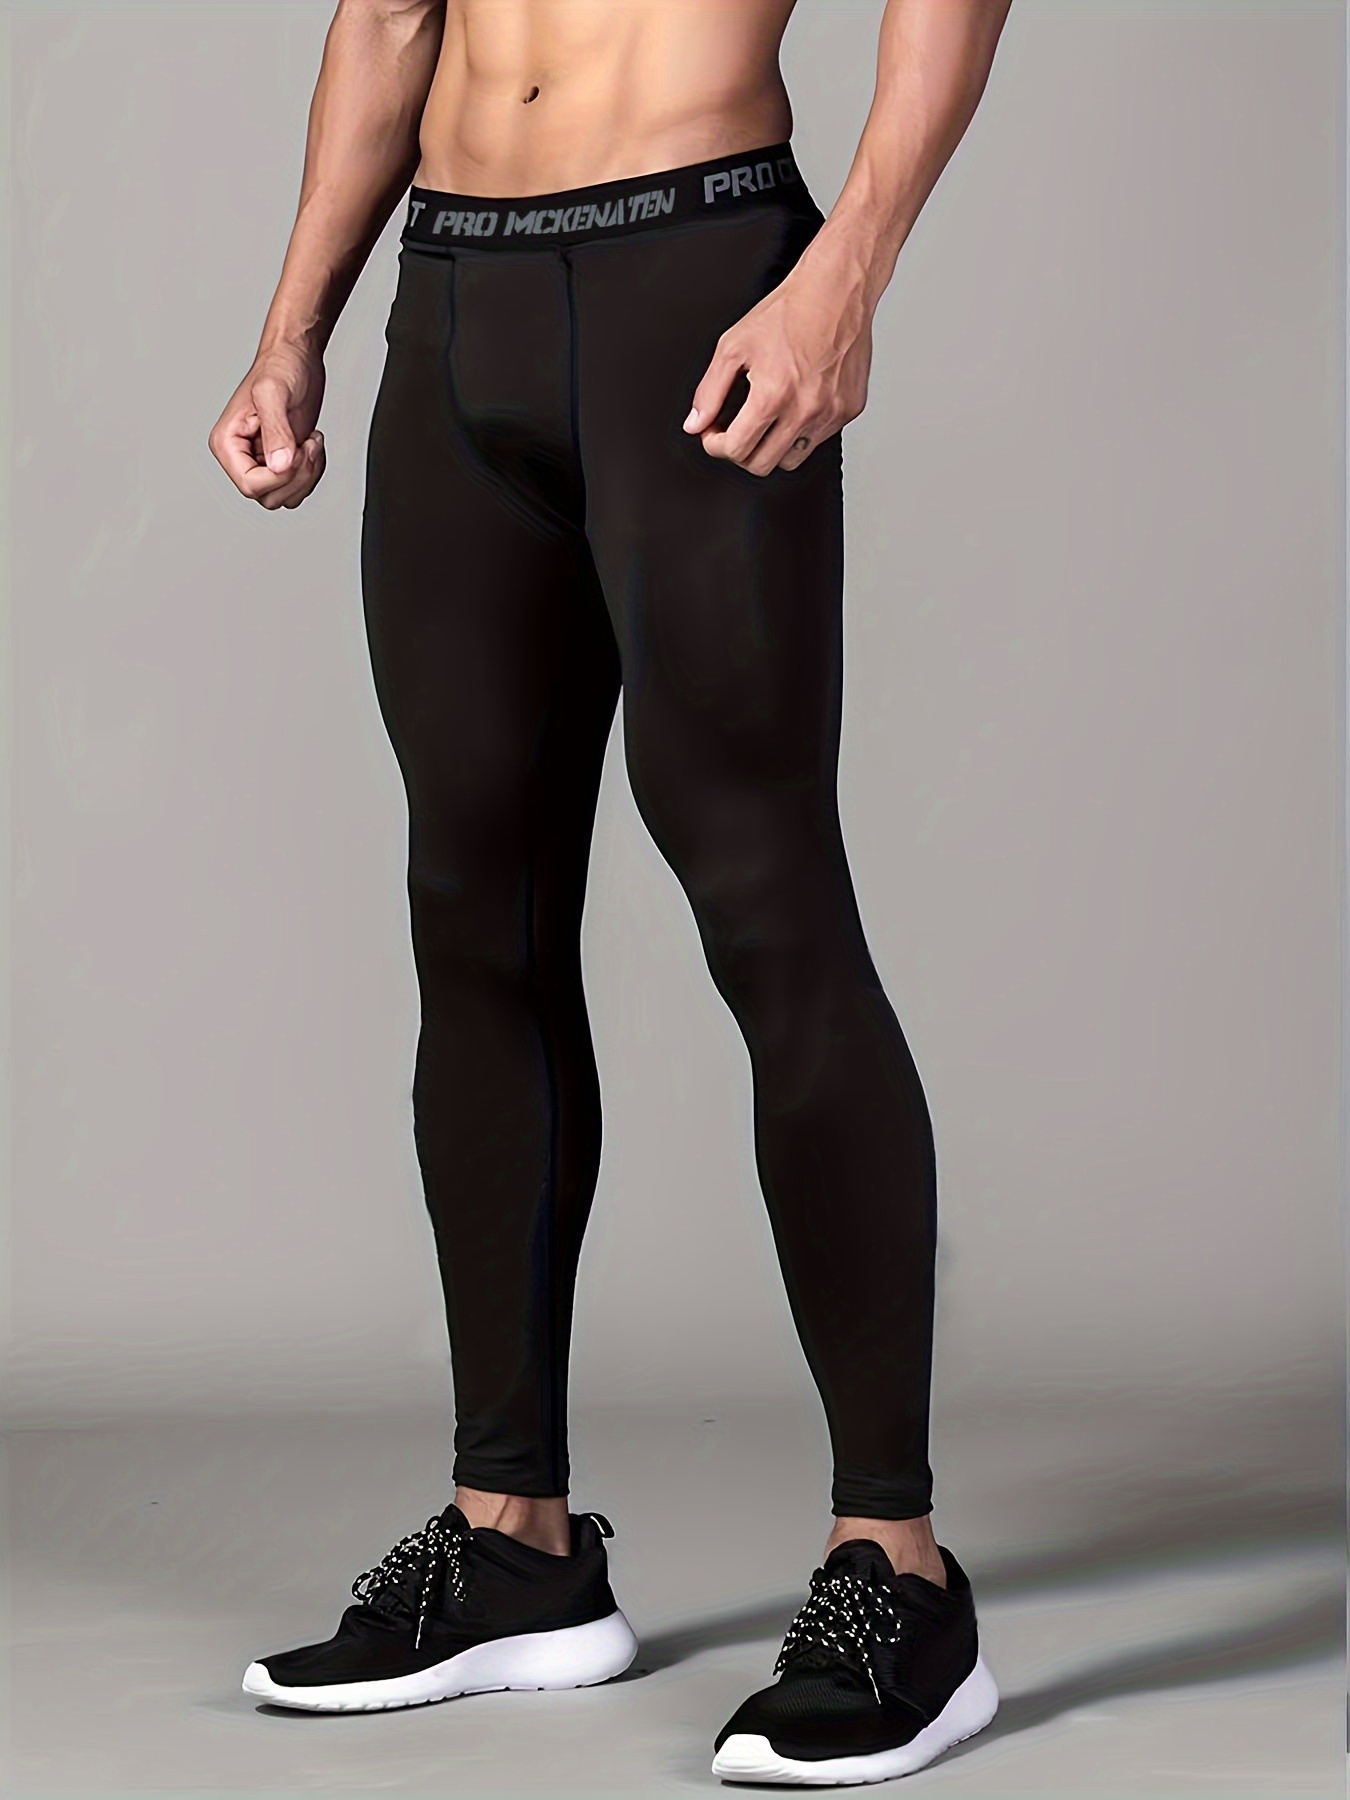 Mens Compression Pants For Sports, Running, Basketball, Gym, Bodybuilding,  Jogging Skinny Leggings Gym Trousers For Men Style 1280E From Iklpz, $19.55